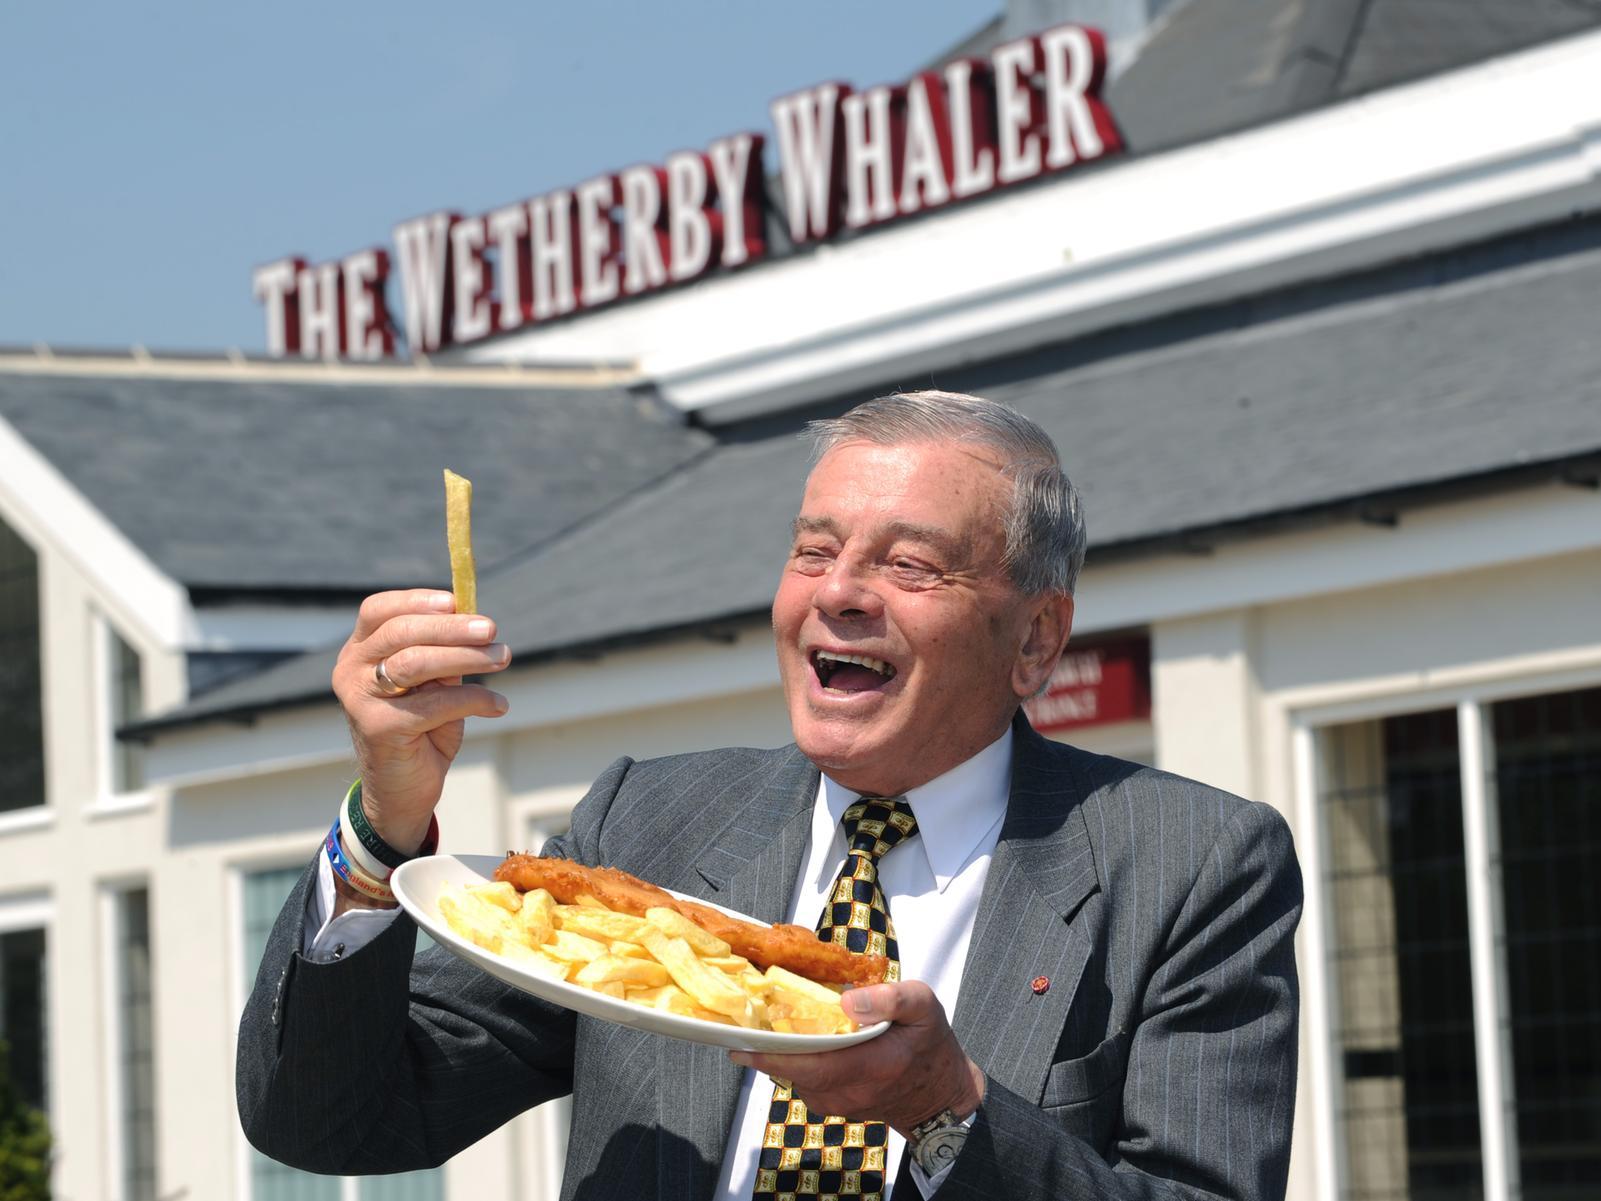 The Guiseley branch of the Wetherby Whaler came third on the list. Pictured is Dickie Bird in 2012 after the Wetherby Whaler took over Harry Ramsdens.